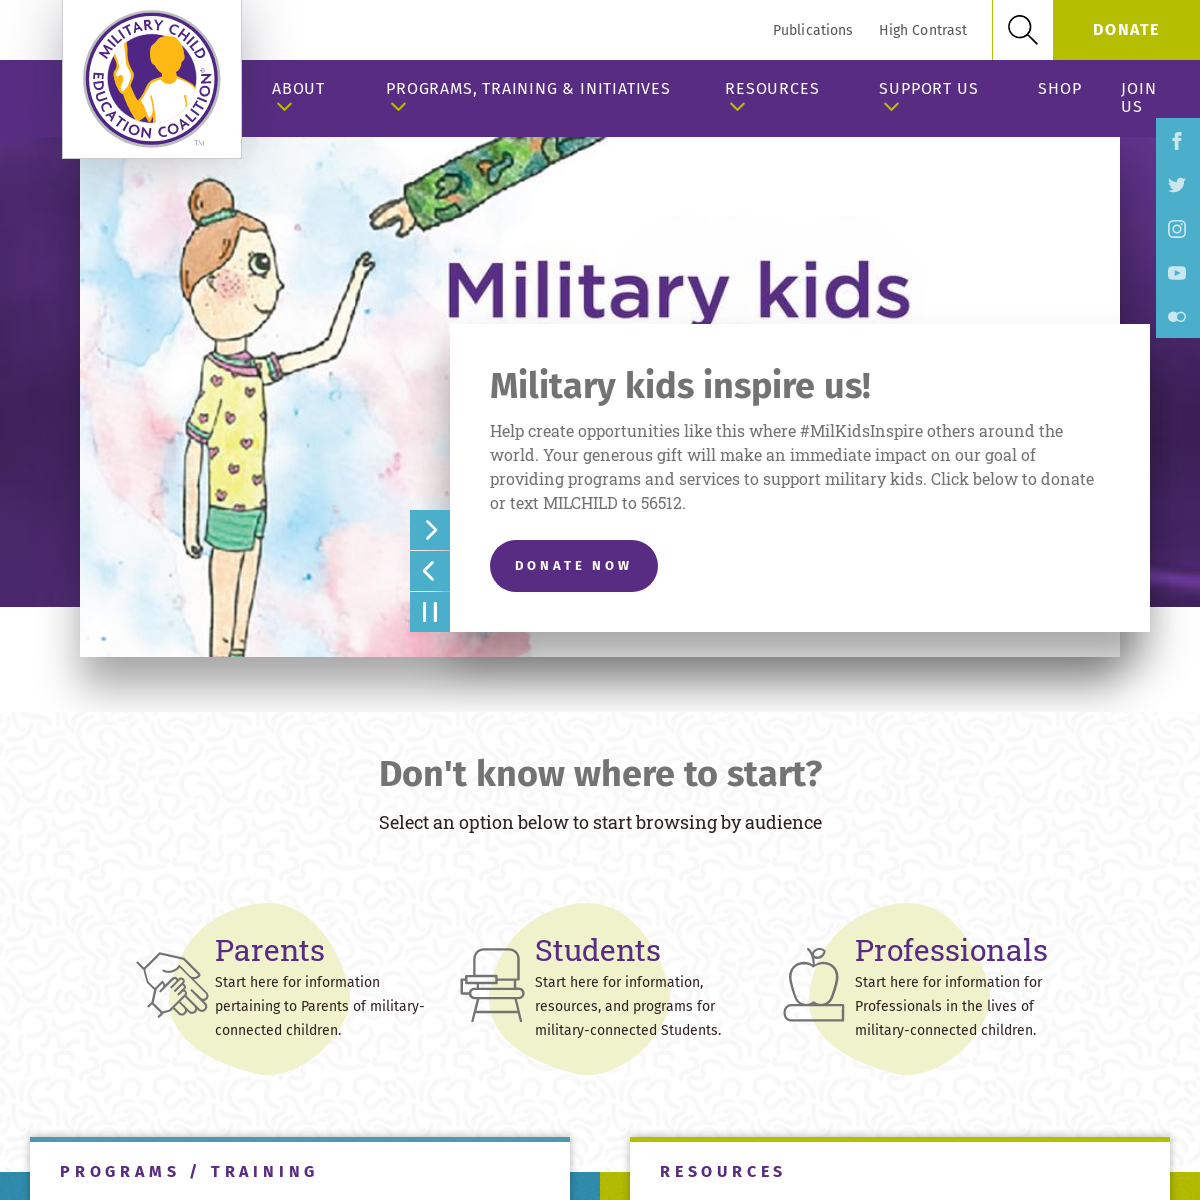 A complete backup of militarychild.org